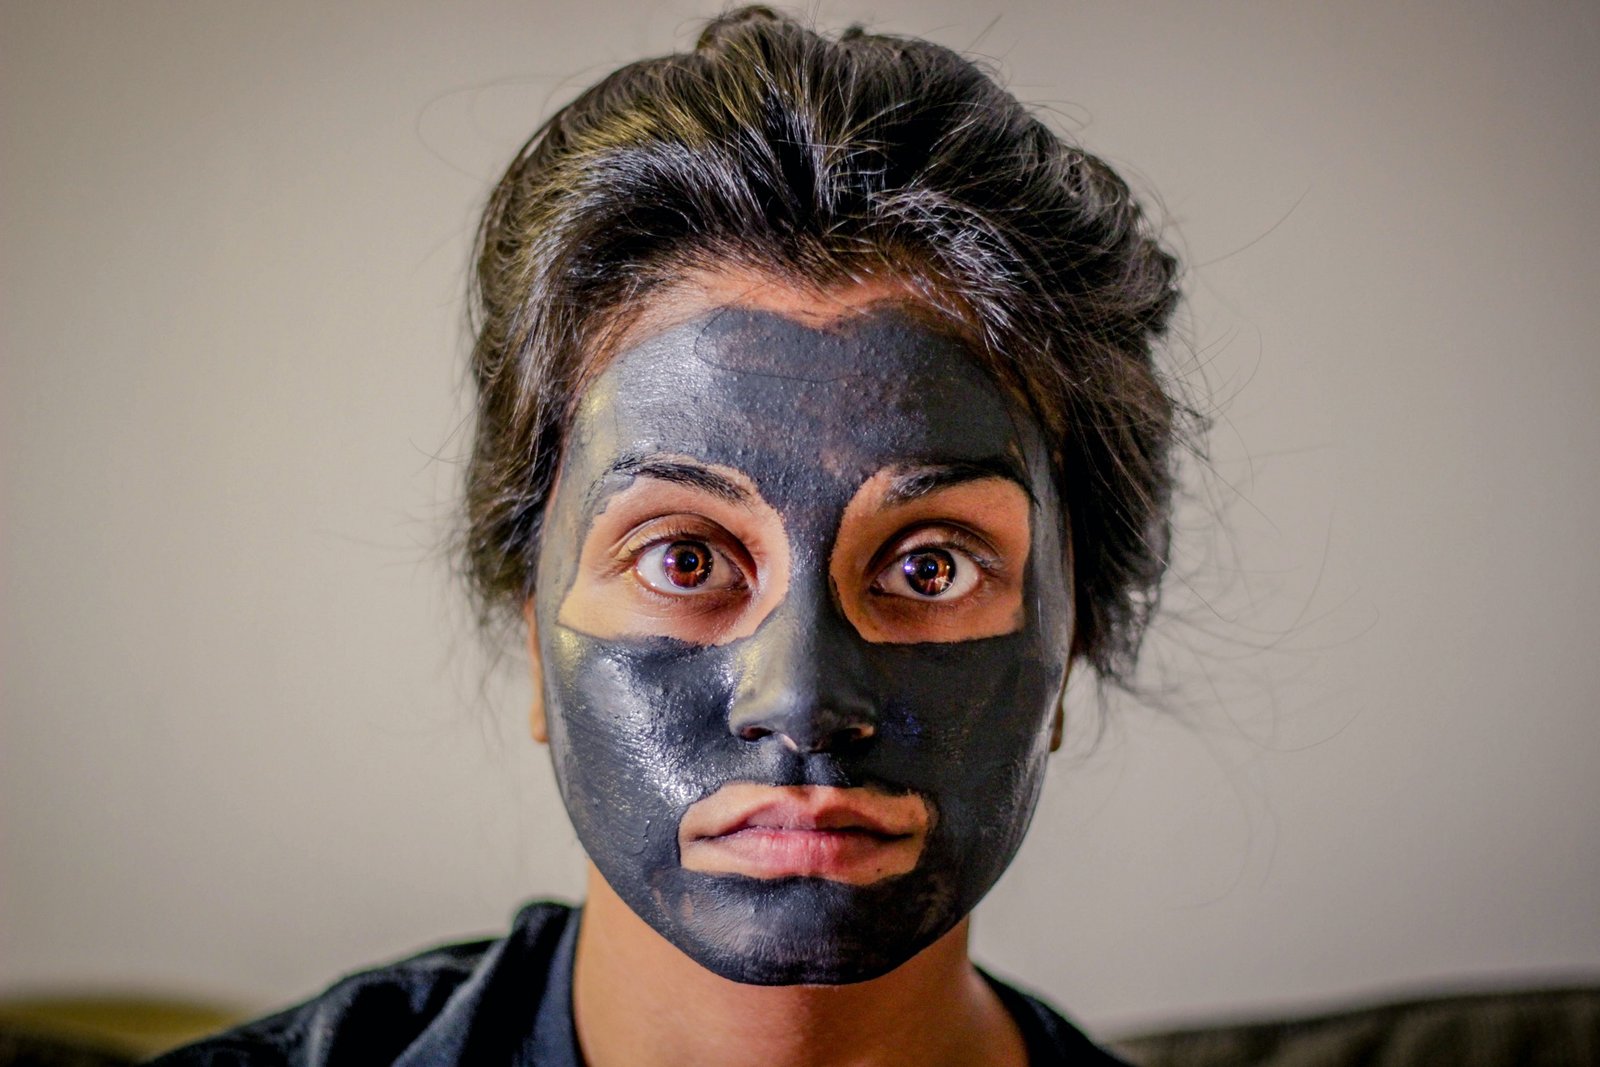 Most Effective Recipes of the Homemade Face Packs